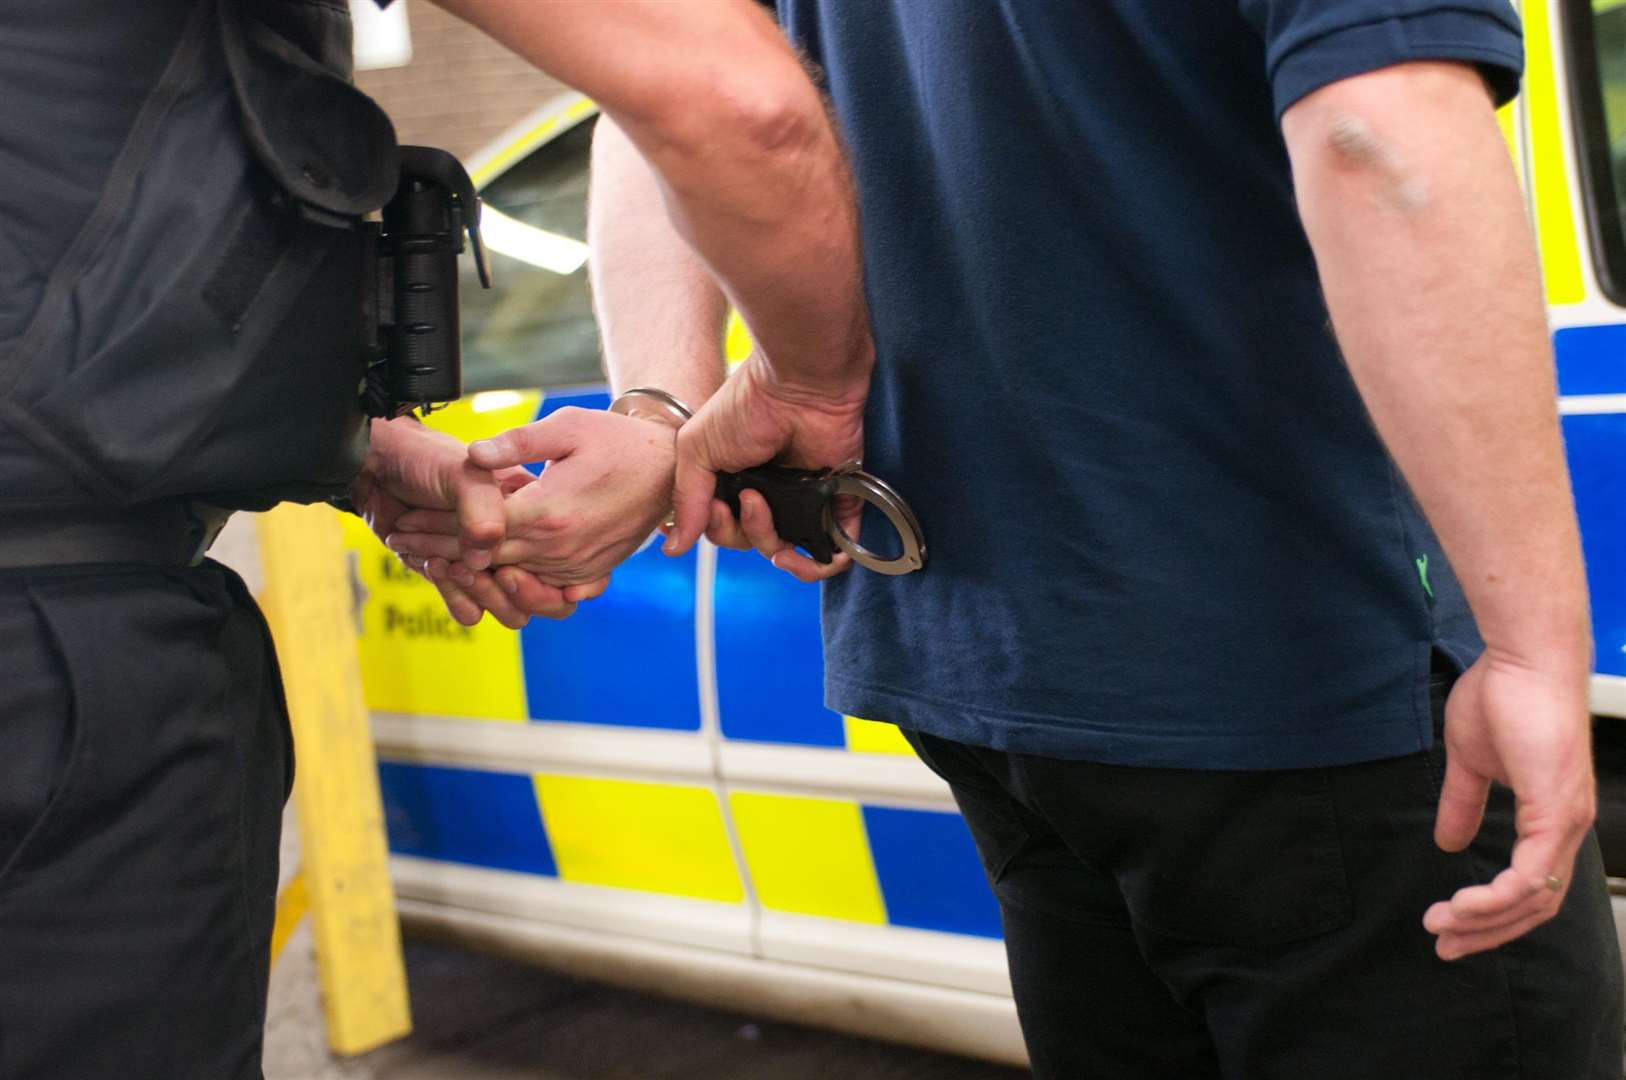 Cell visits are carried out across the Kent Police custody suites